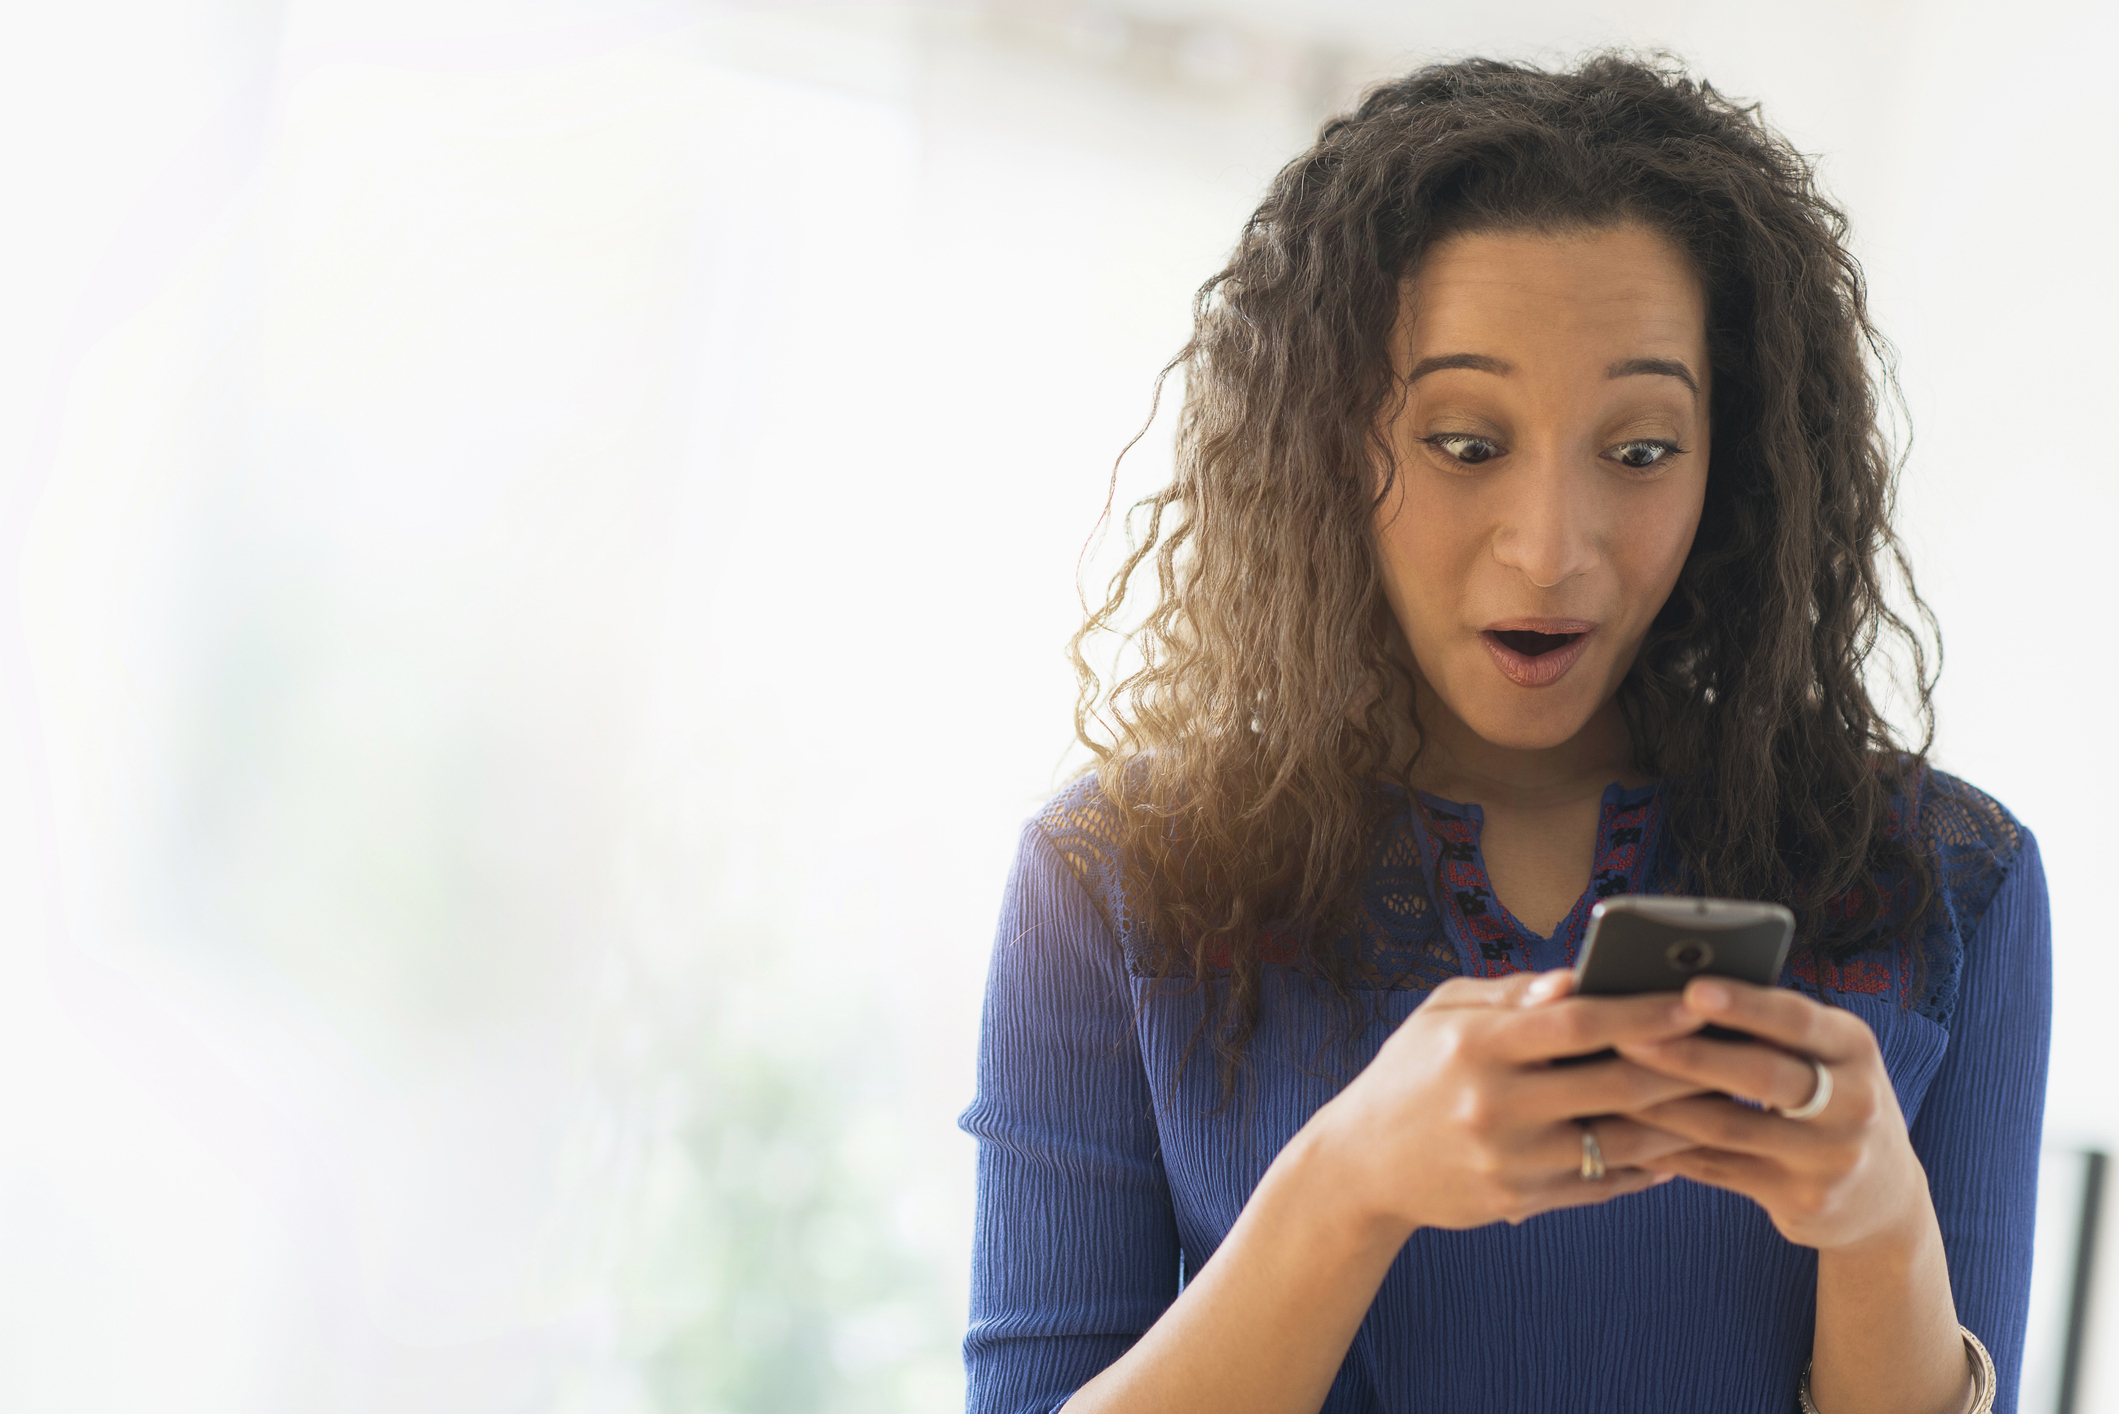 Woman looks at phone with surprised expression, possibly receiving unexpected romantic message